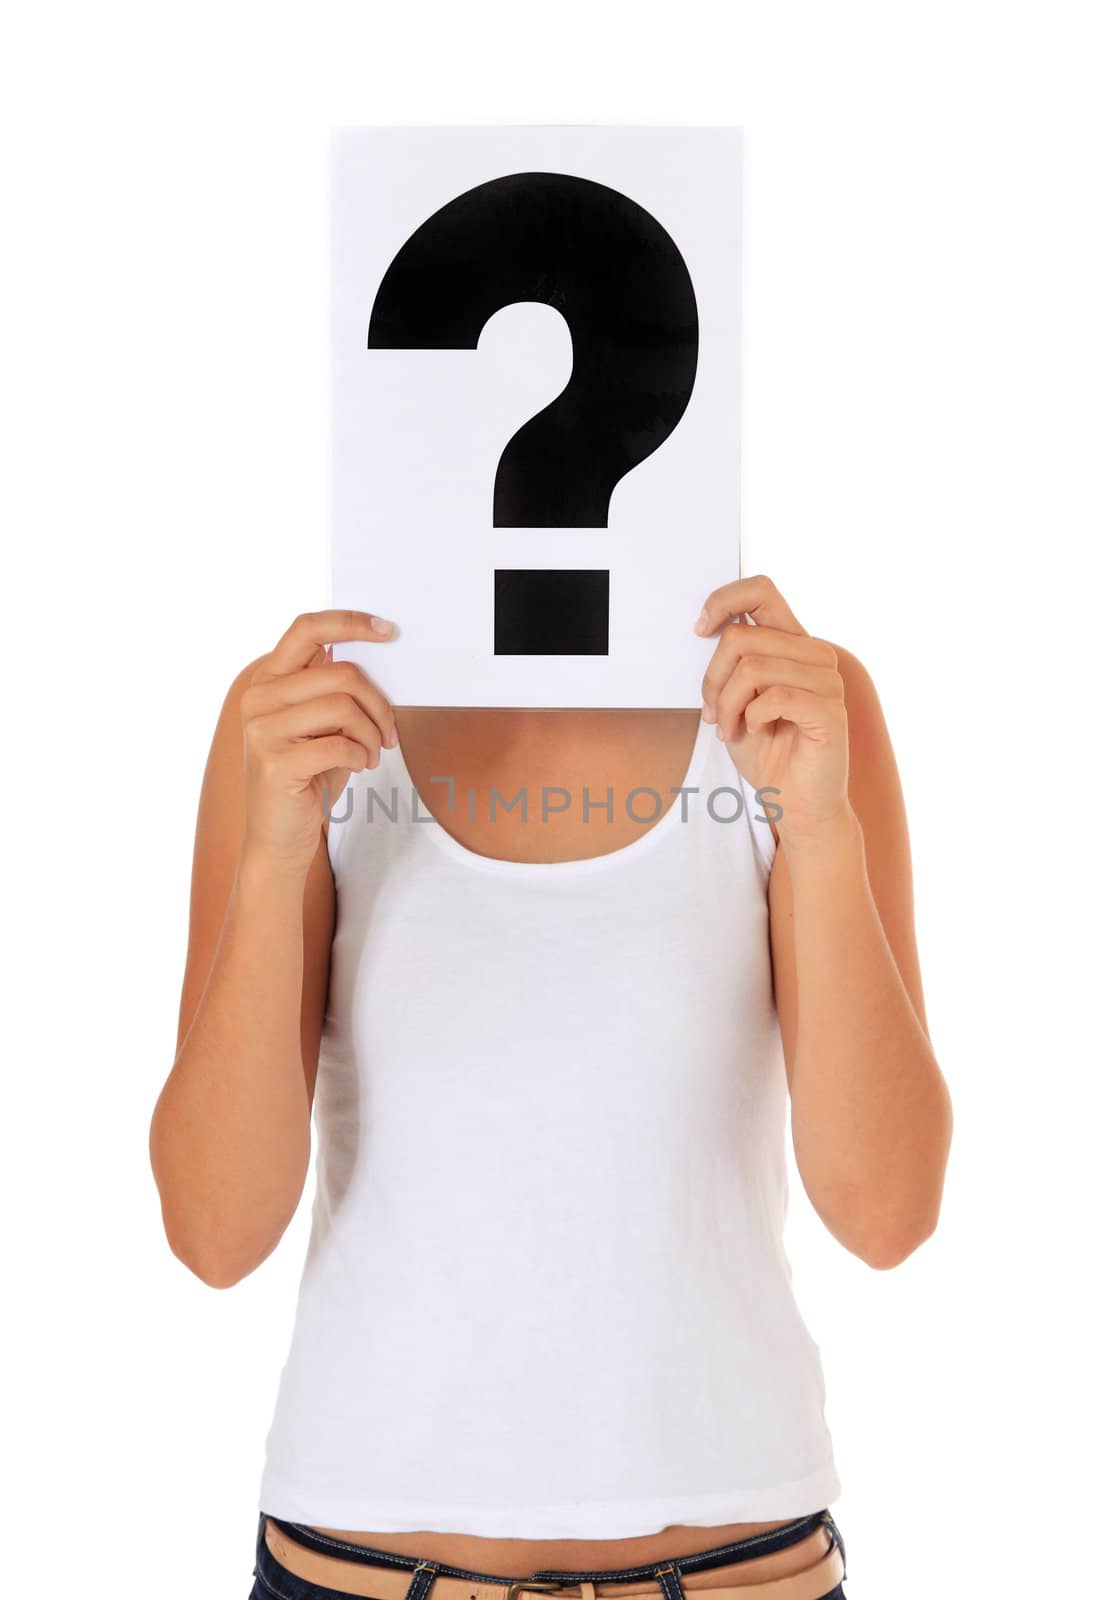 Attractive young woman holding a sign with question mark infront of her face. All isolated on white background.